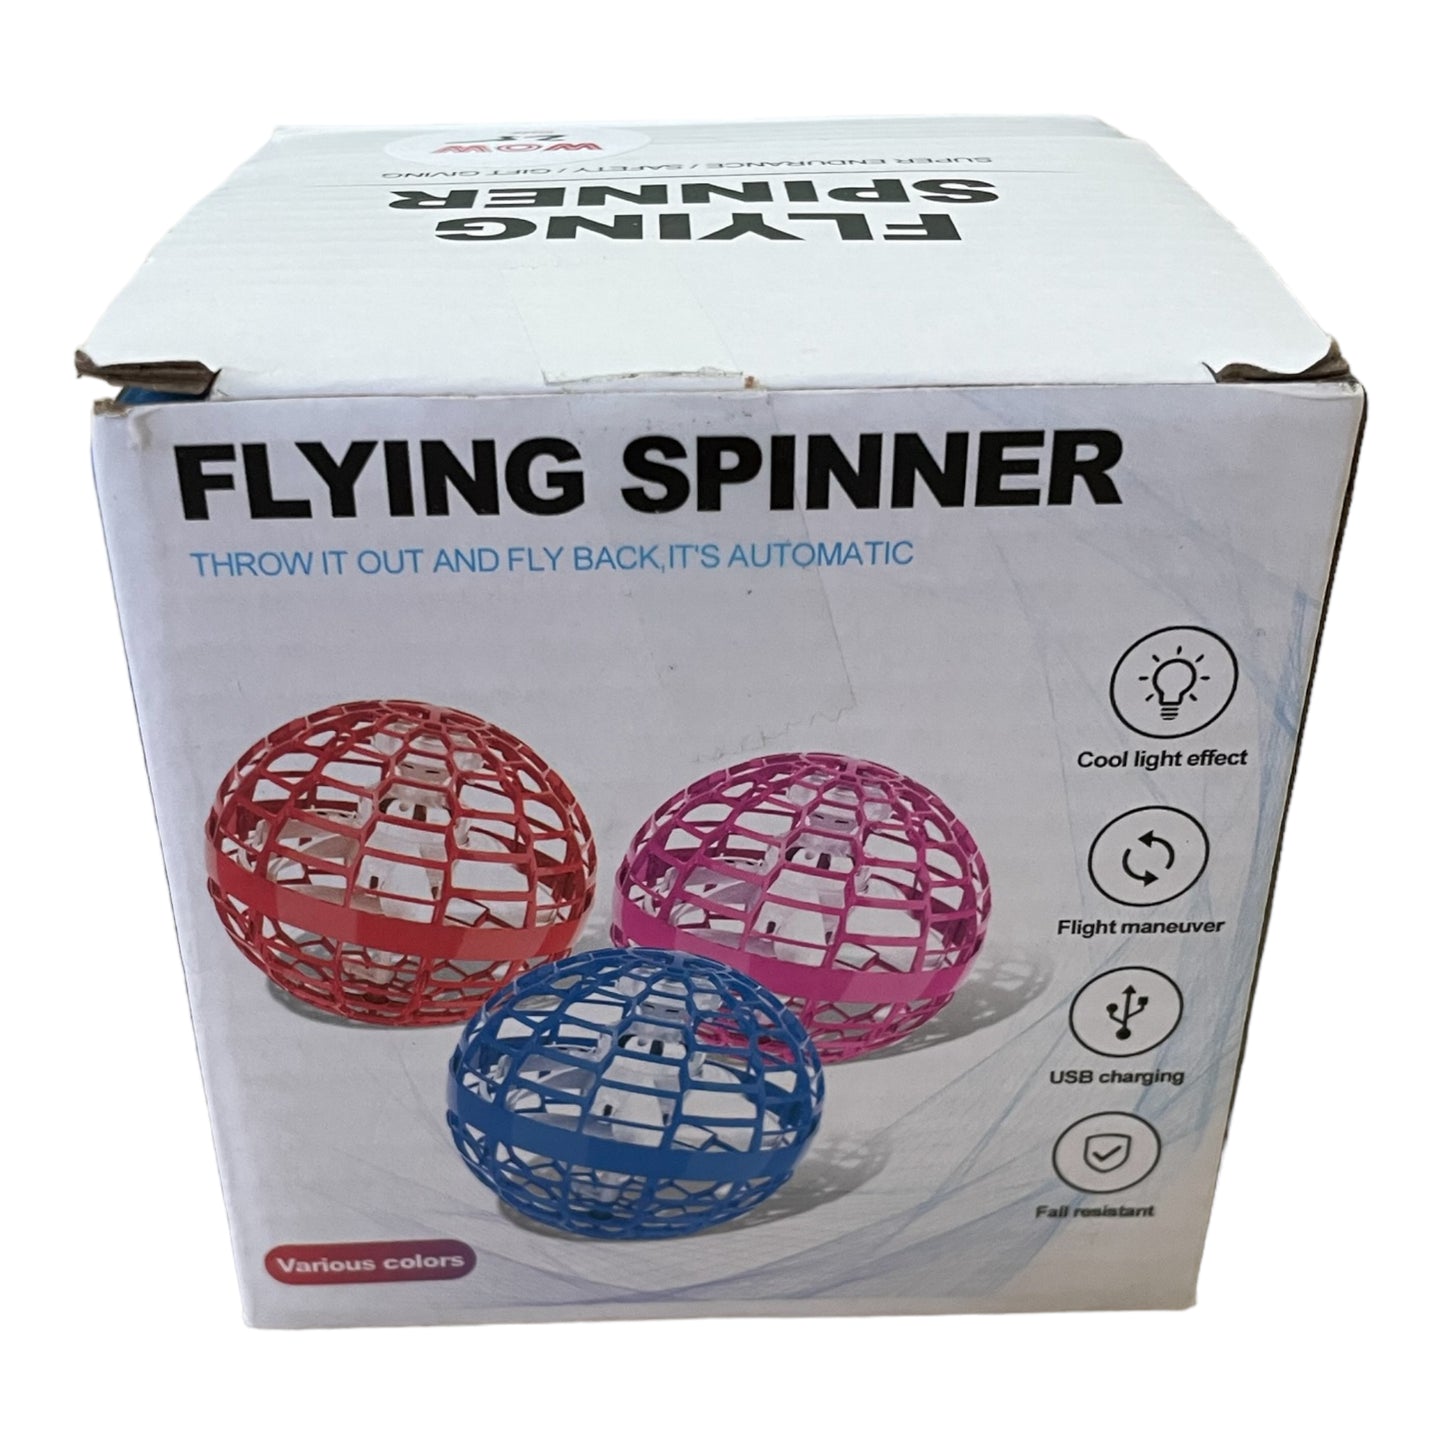 Fyling Spinner - Blue - Drone - Boomerang Flyer with LED effects